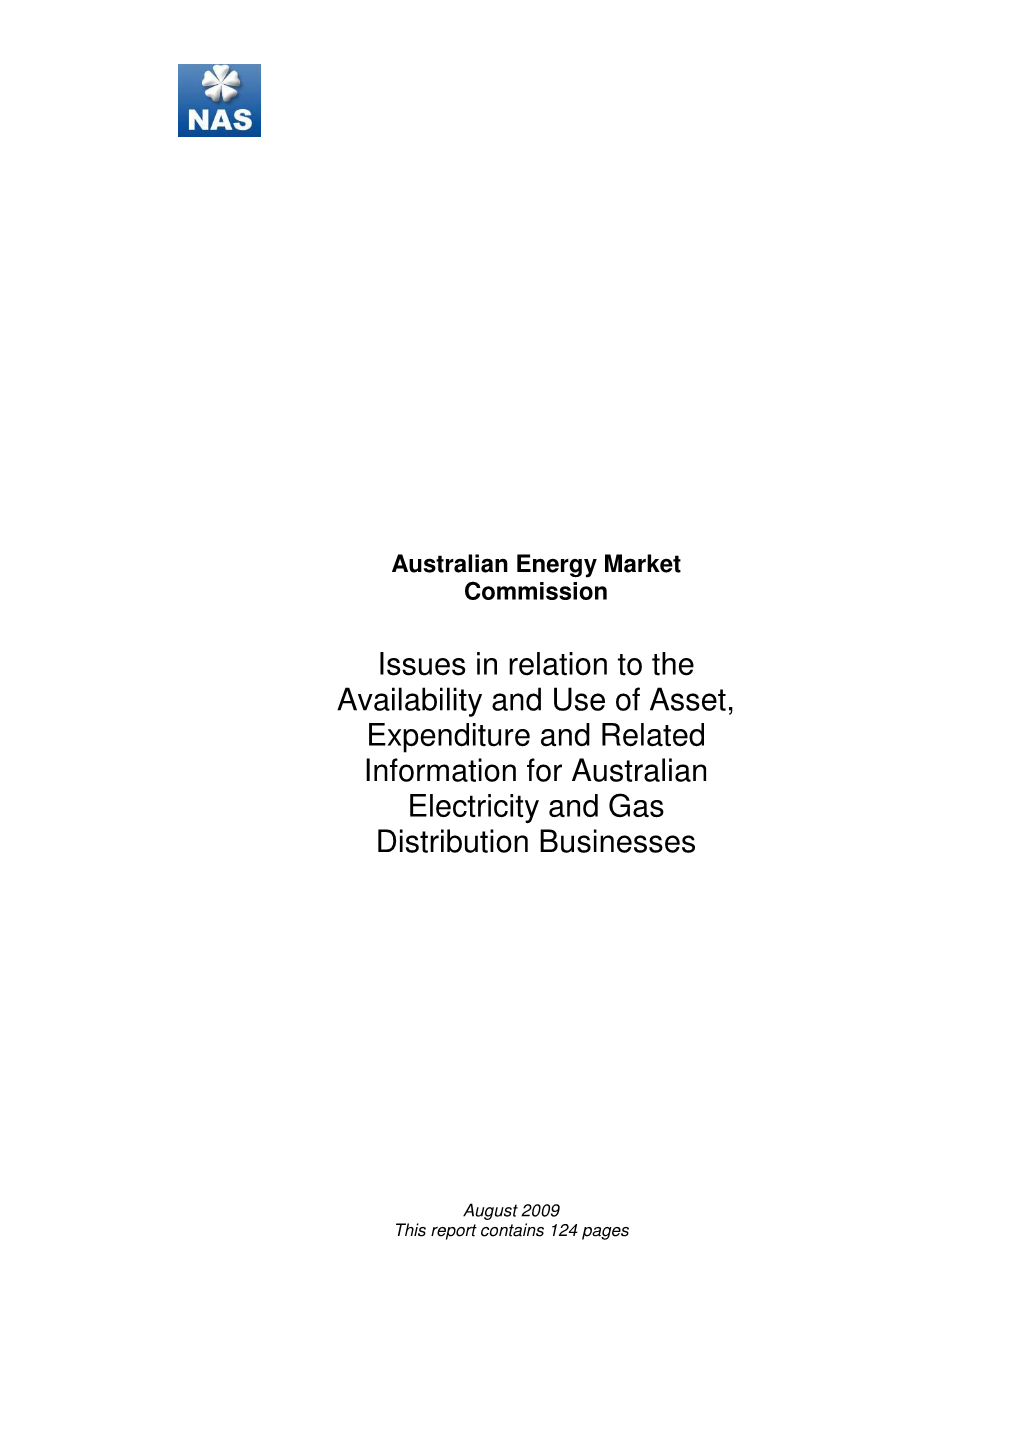 Issues in Relation to the Availability and Use of Asset, Expenditure and Related Information for Australian Electricity and Gas Distribution Businesses